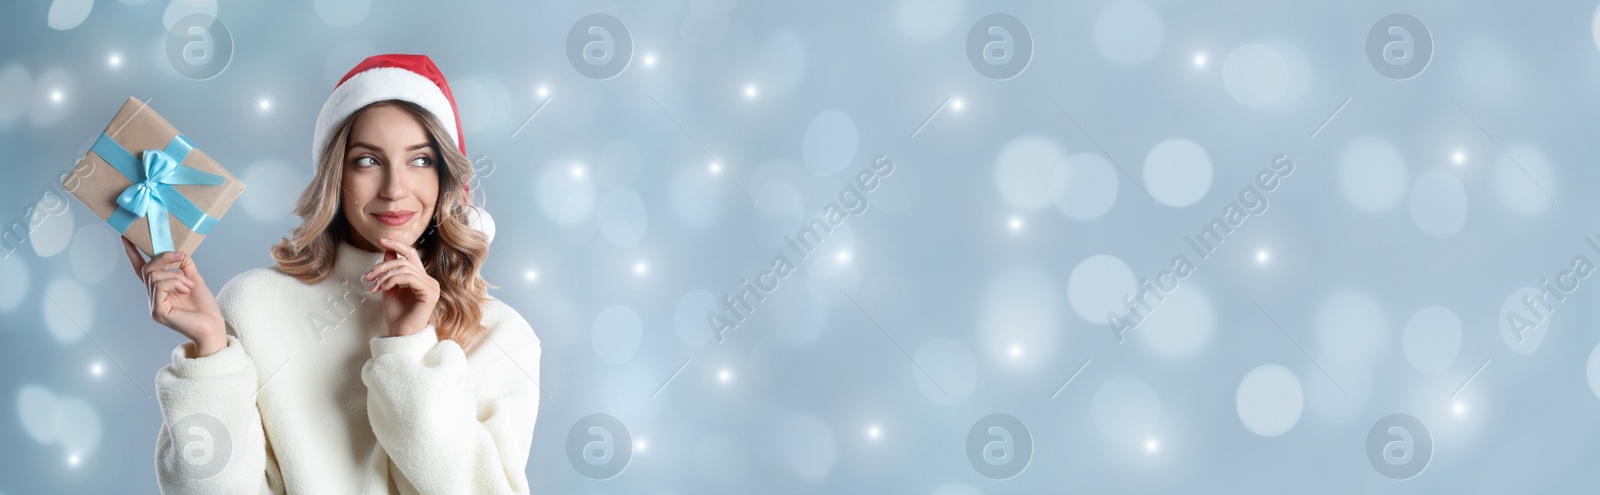 Image of Beautiful woman in Christmas hat holding gift box on light grey background, space for text. Banner design